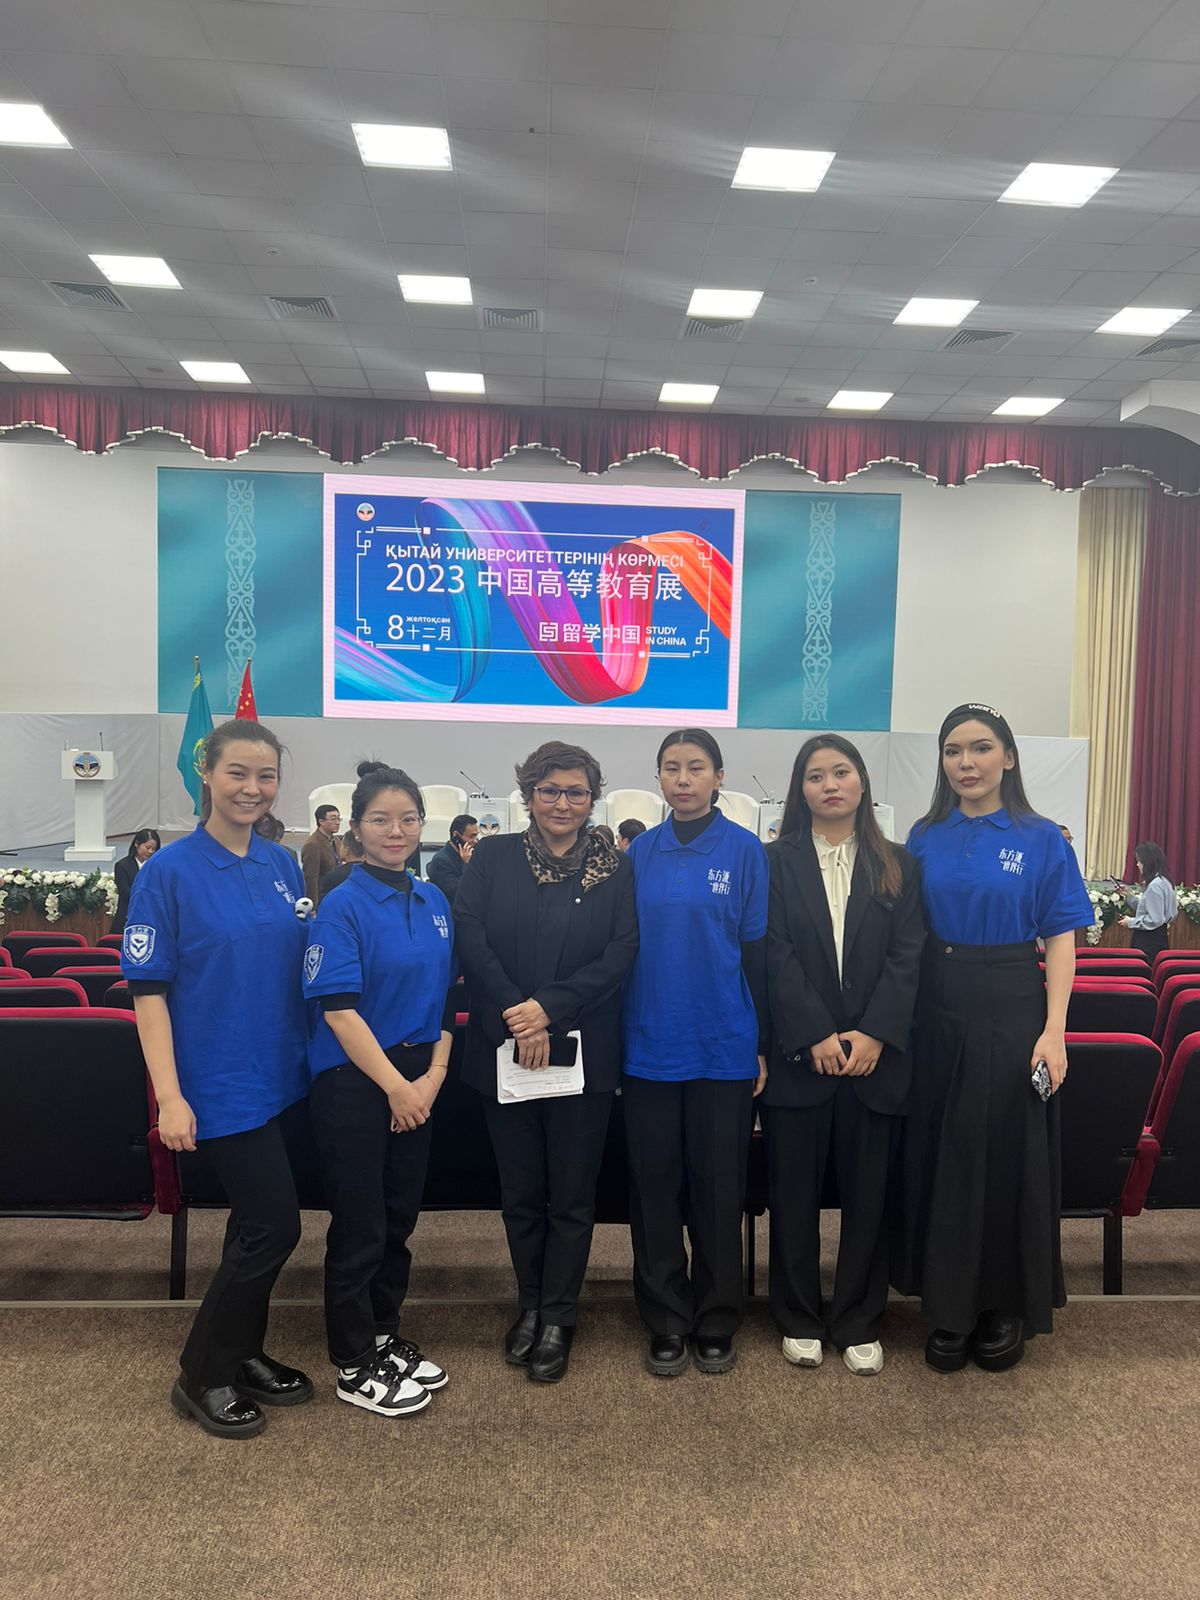 Doctoral and undergraduates provided simultaneous interpretation at the exhibition "Higher Education in China"